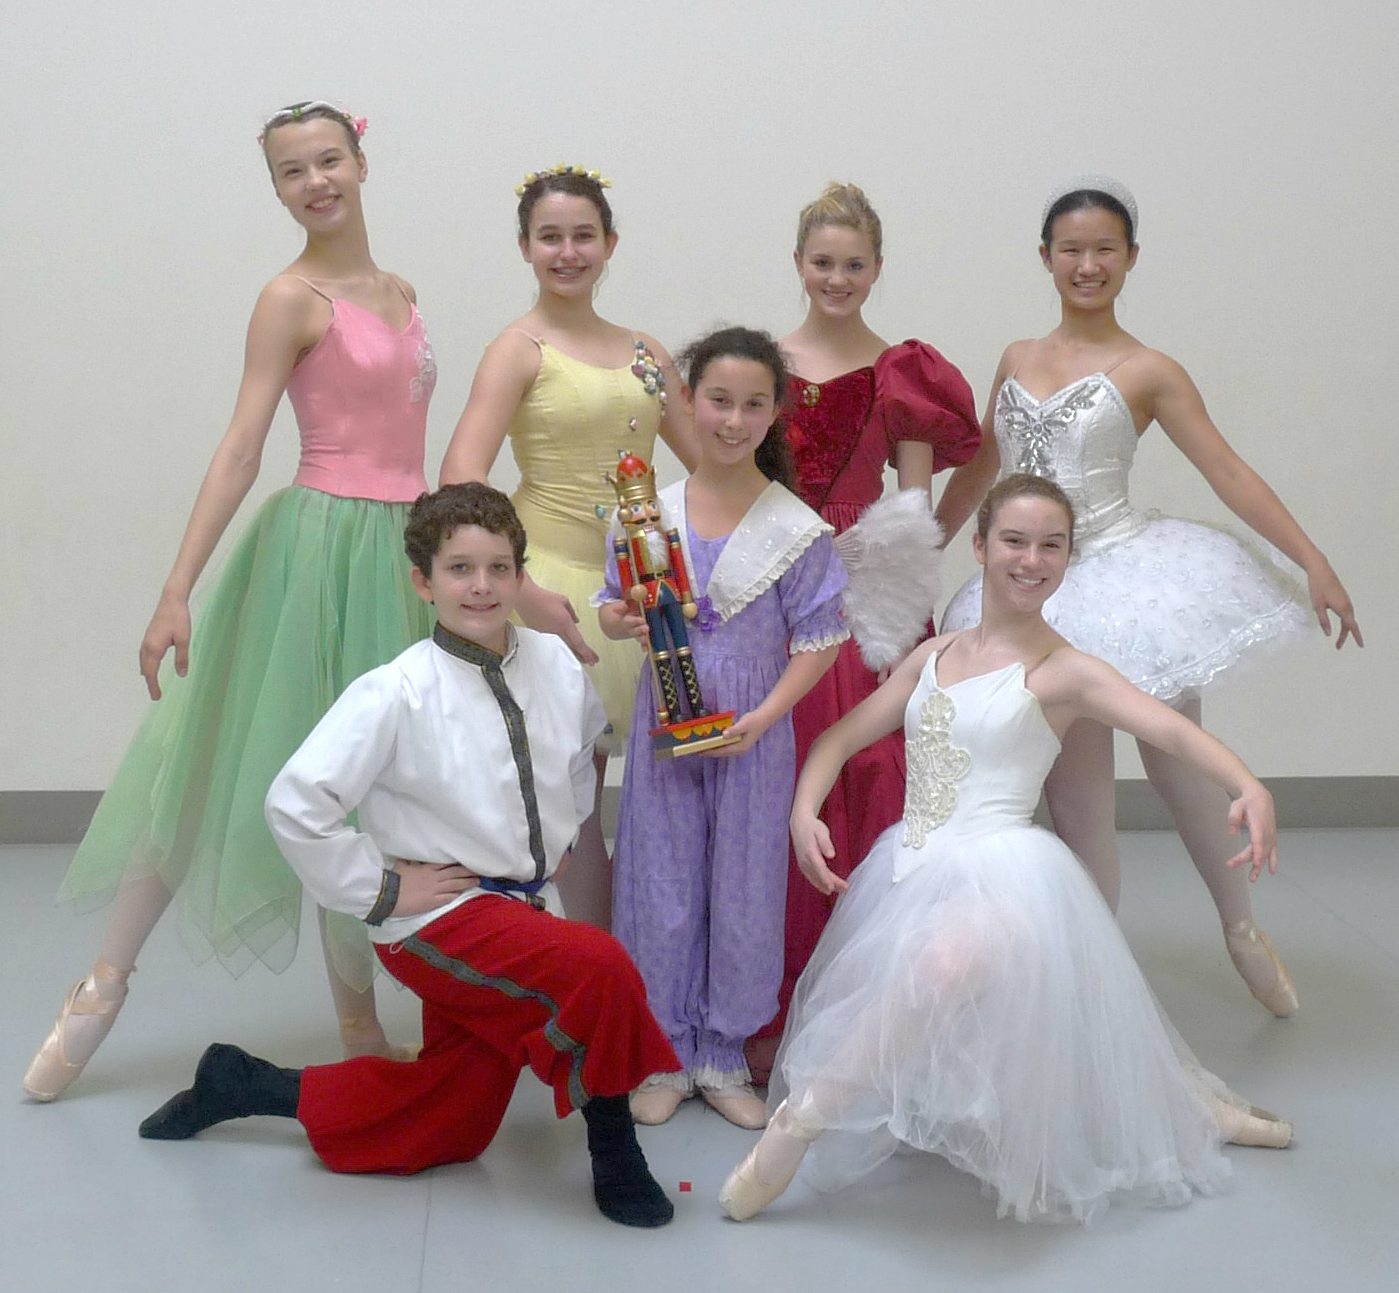 These local youth will perform in &quot;The Nutcracker&quot; this weekend at the Royal Durst Theatre.